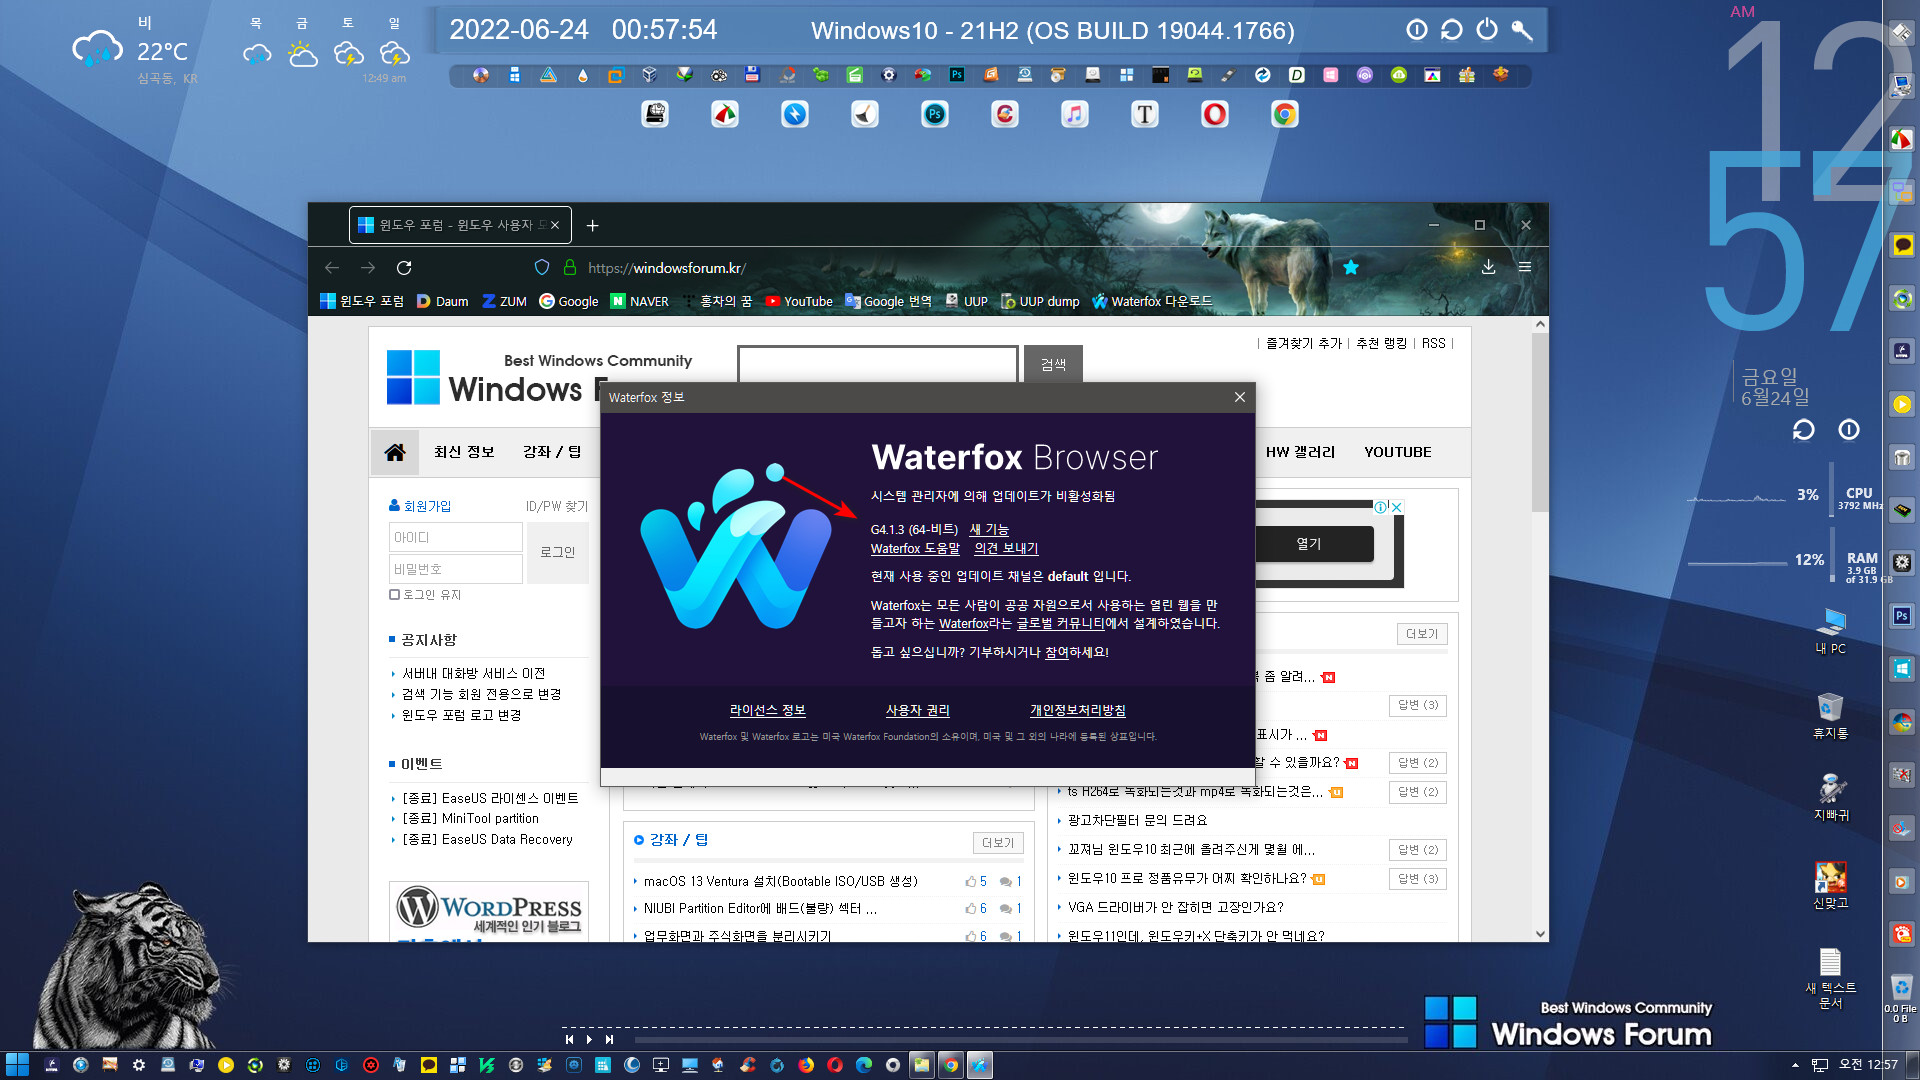 Waterfox Current G5.1.9 instal the new